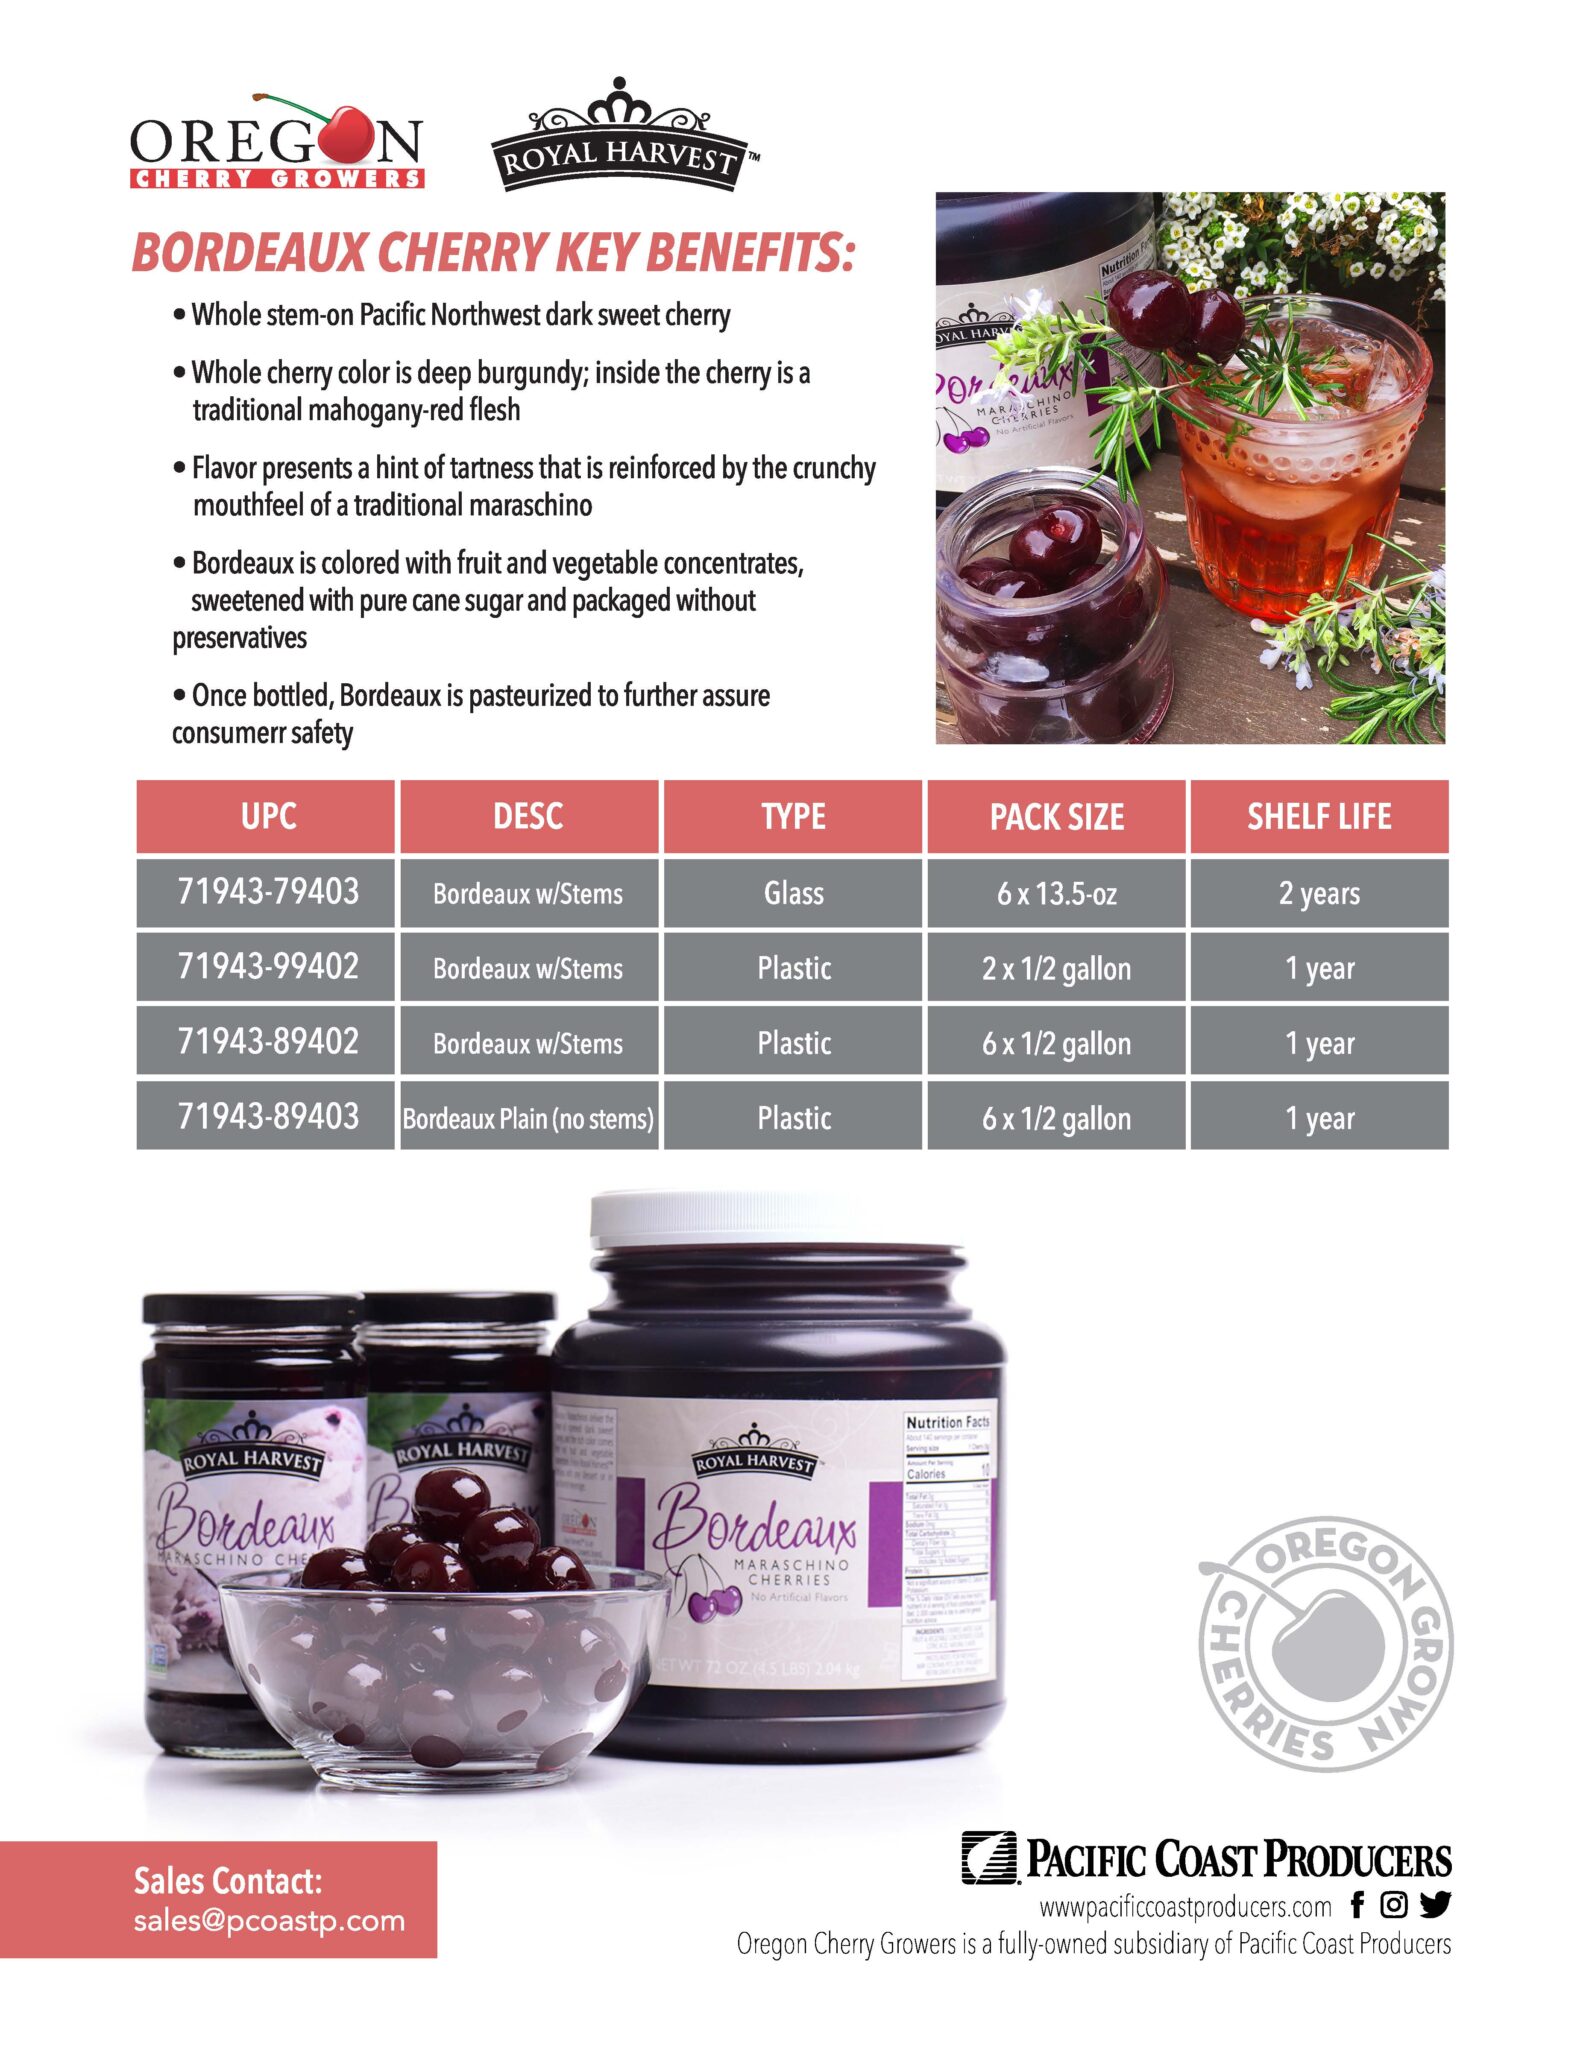 A sales sheet flyer promoting a jar of cherries.